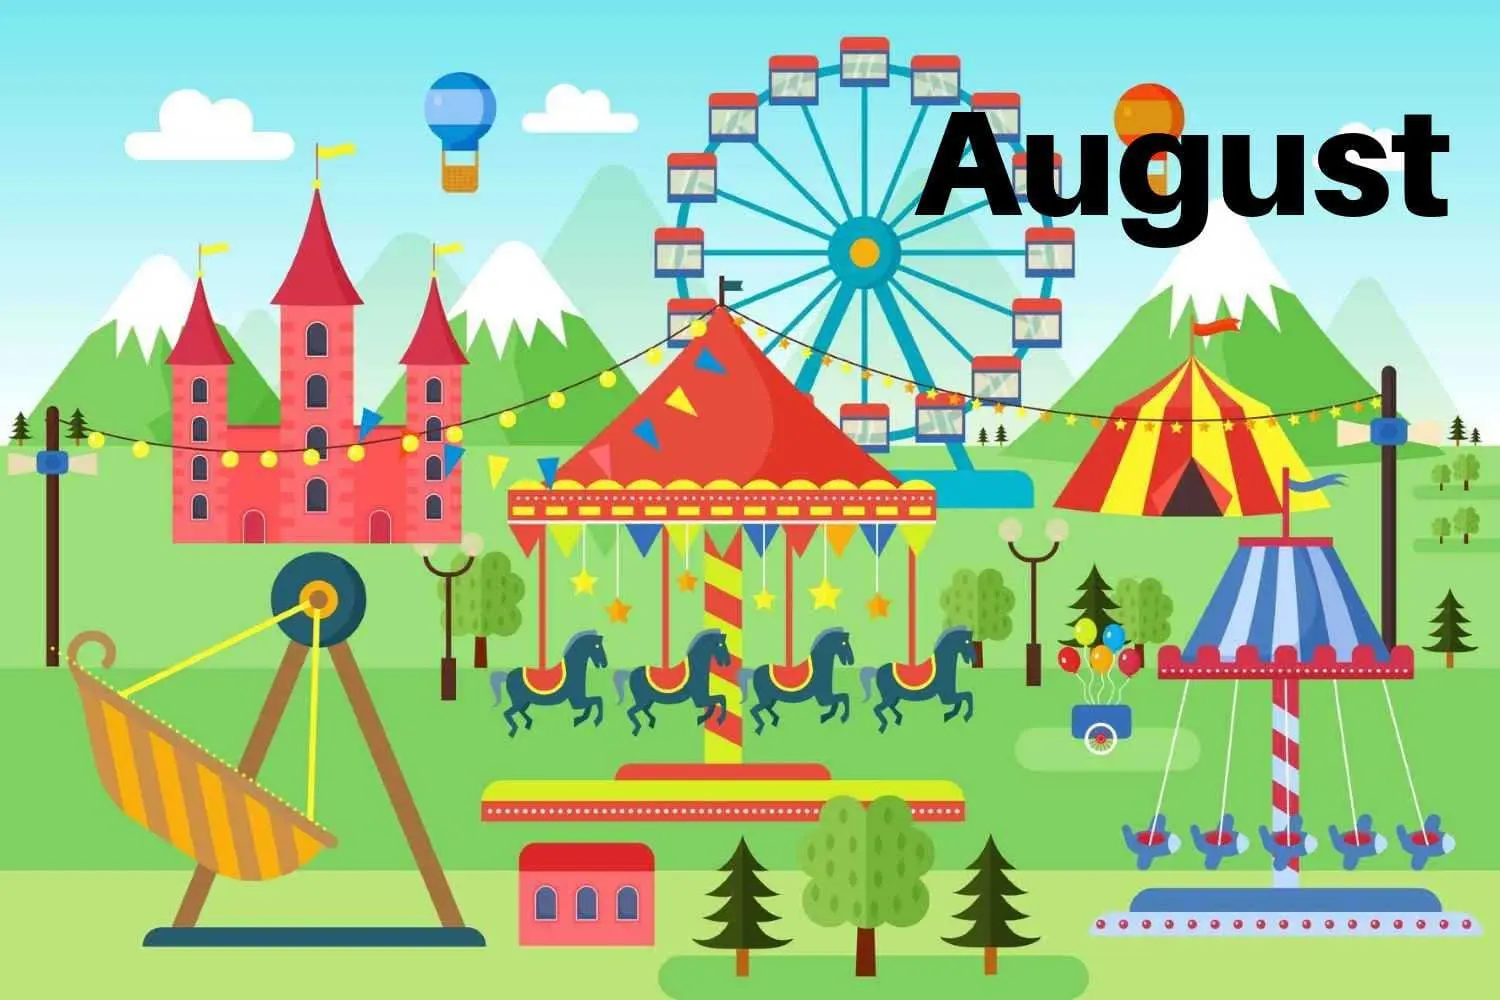 German American Festival and Events for August